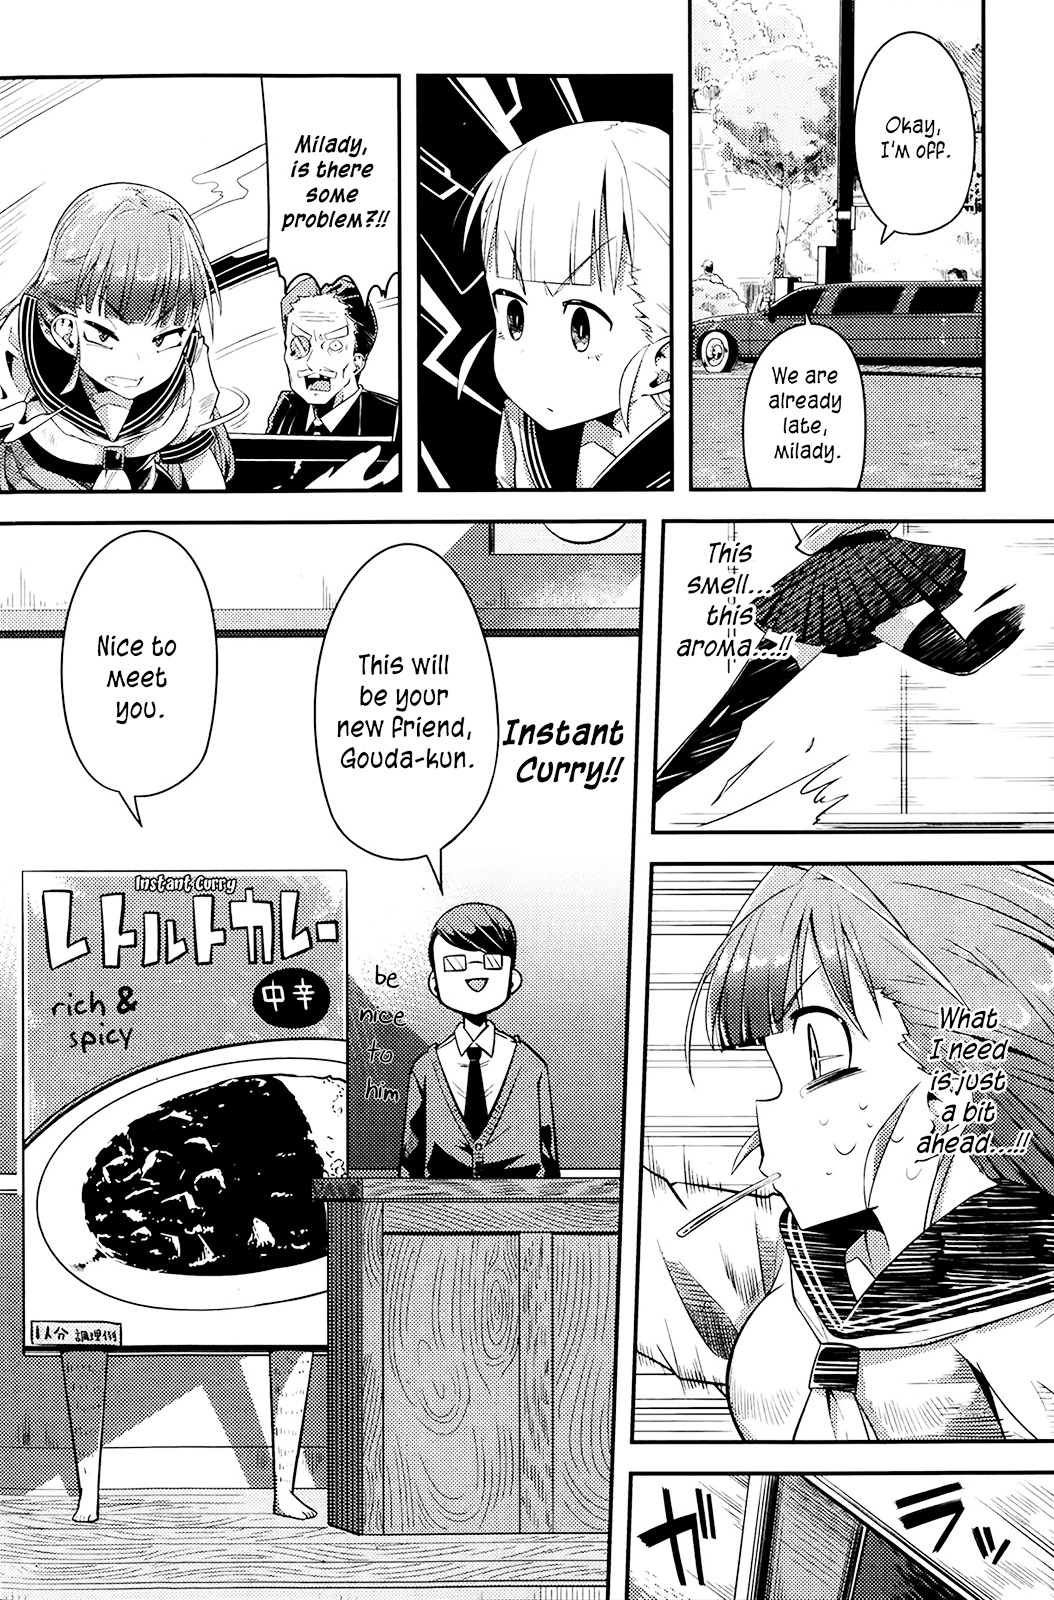 Girl Vs Curry - Page 2